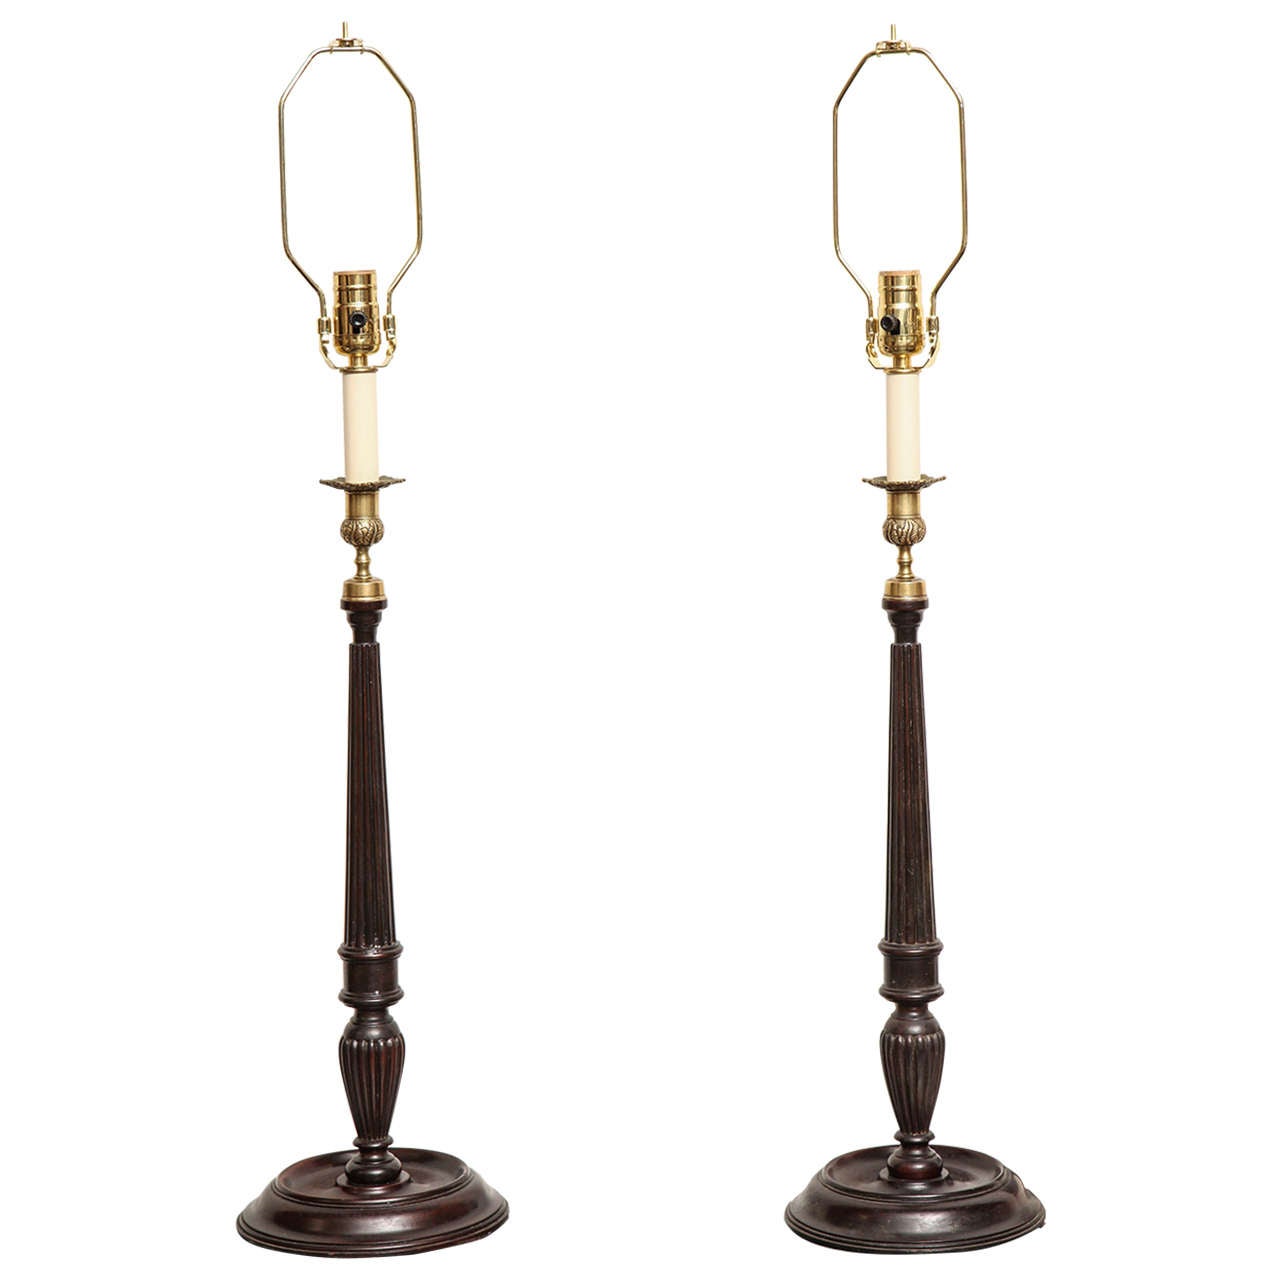 Pair of Early 19th Century English Candlesticks Converted to Lamps